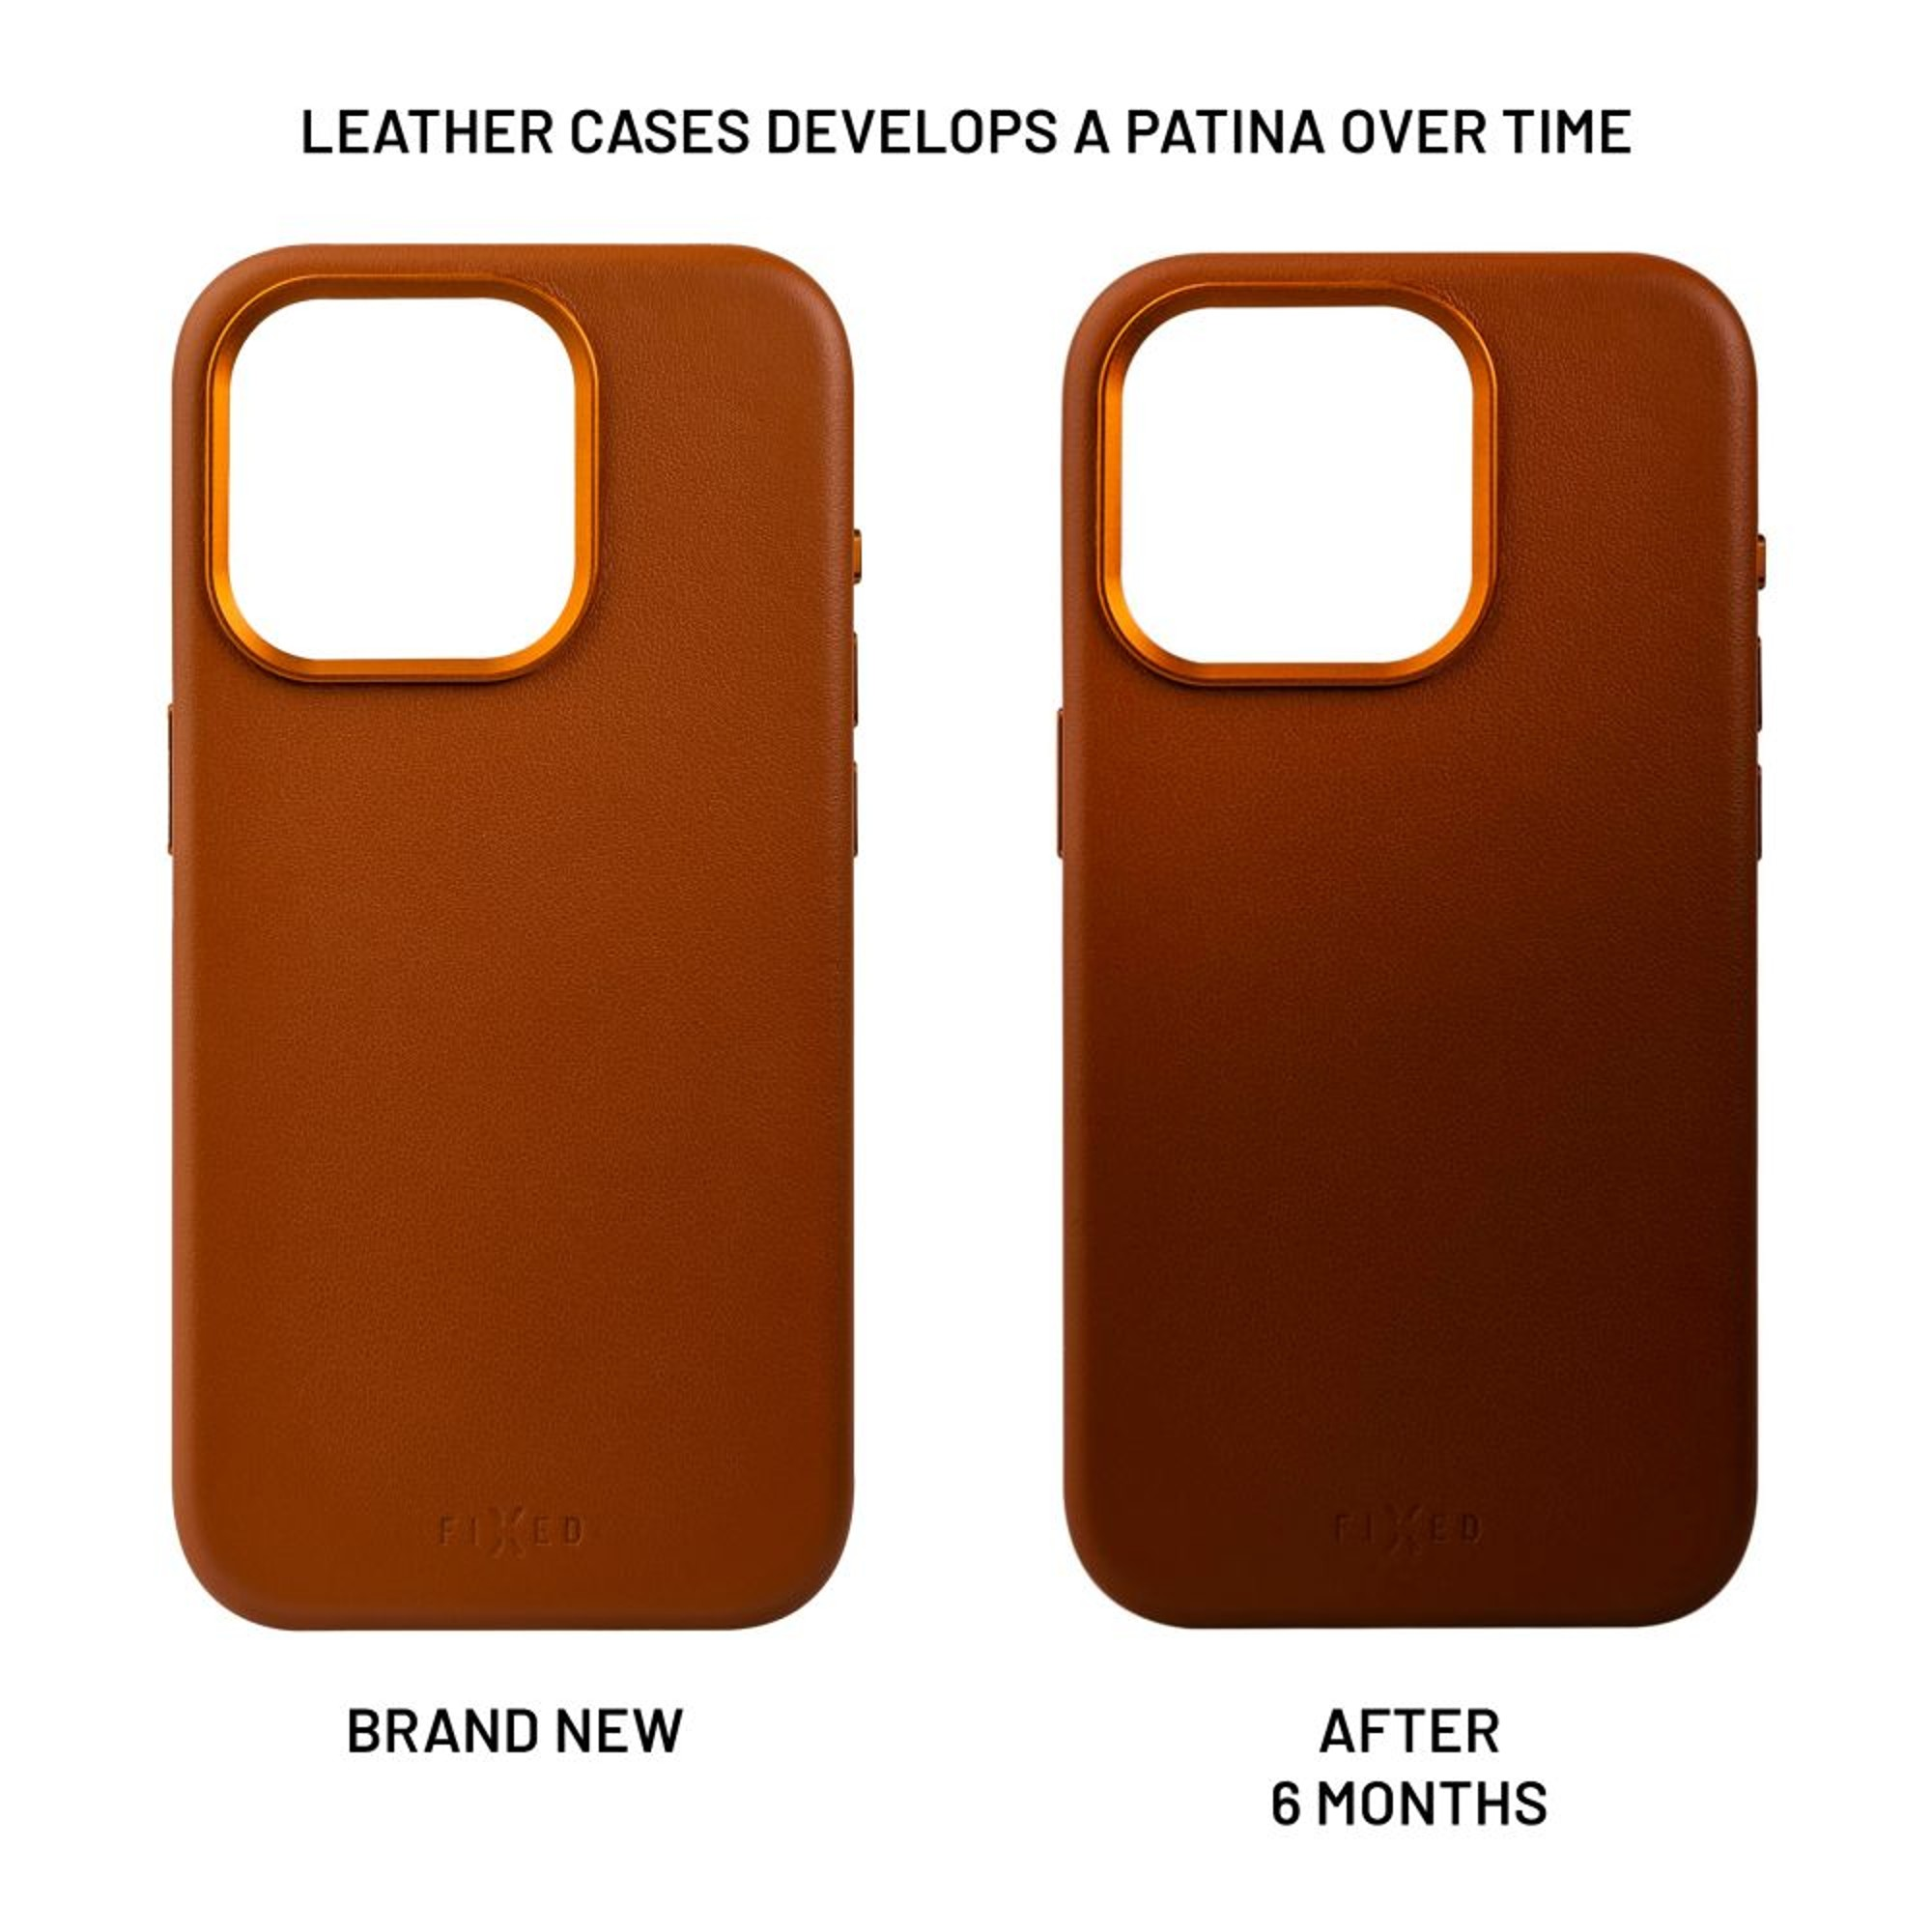 FIXLM-793-BRW, FIXED Pro, iPhone Apple, Braun Backcover, 13